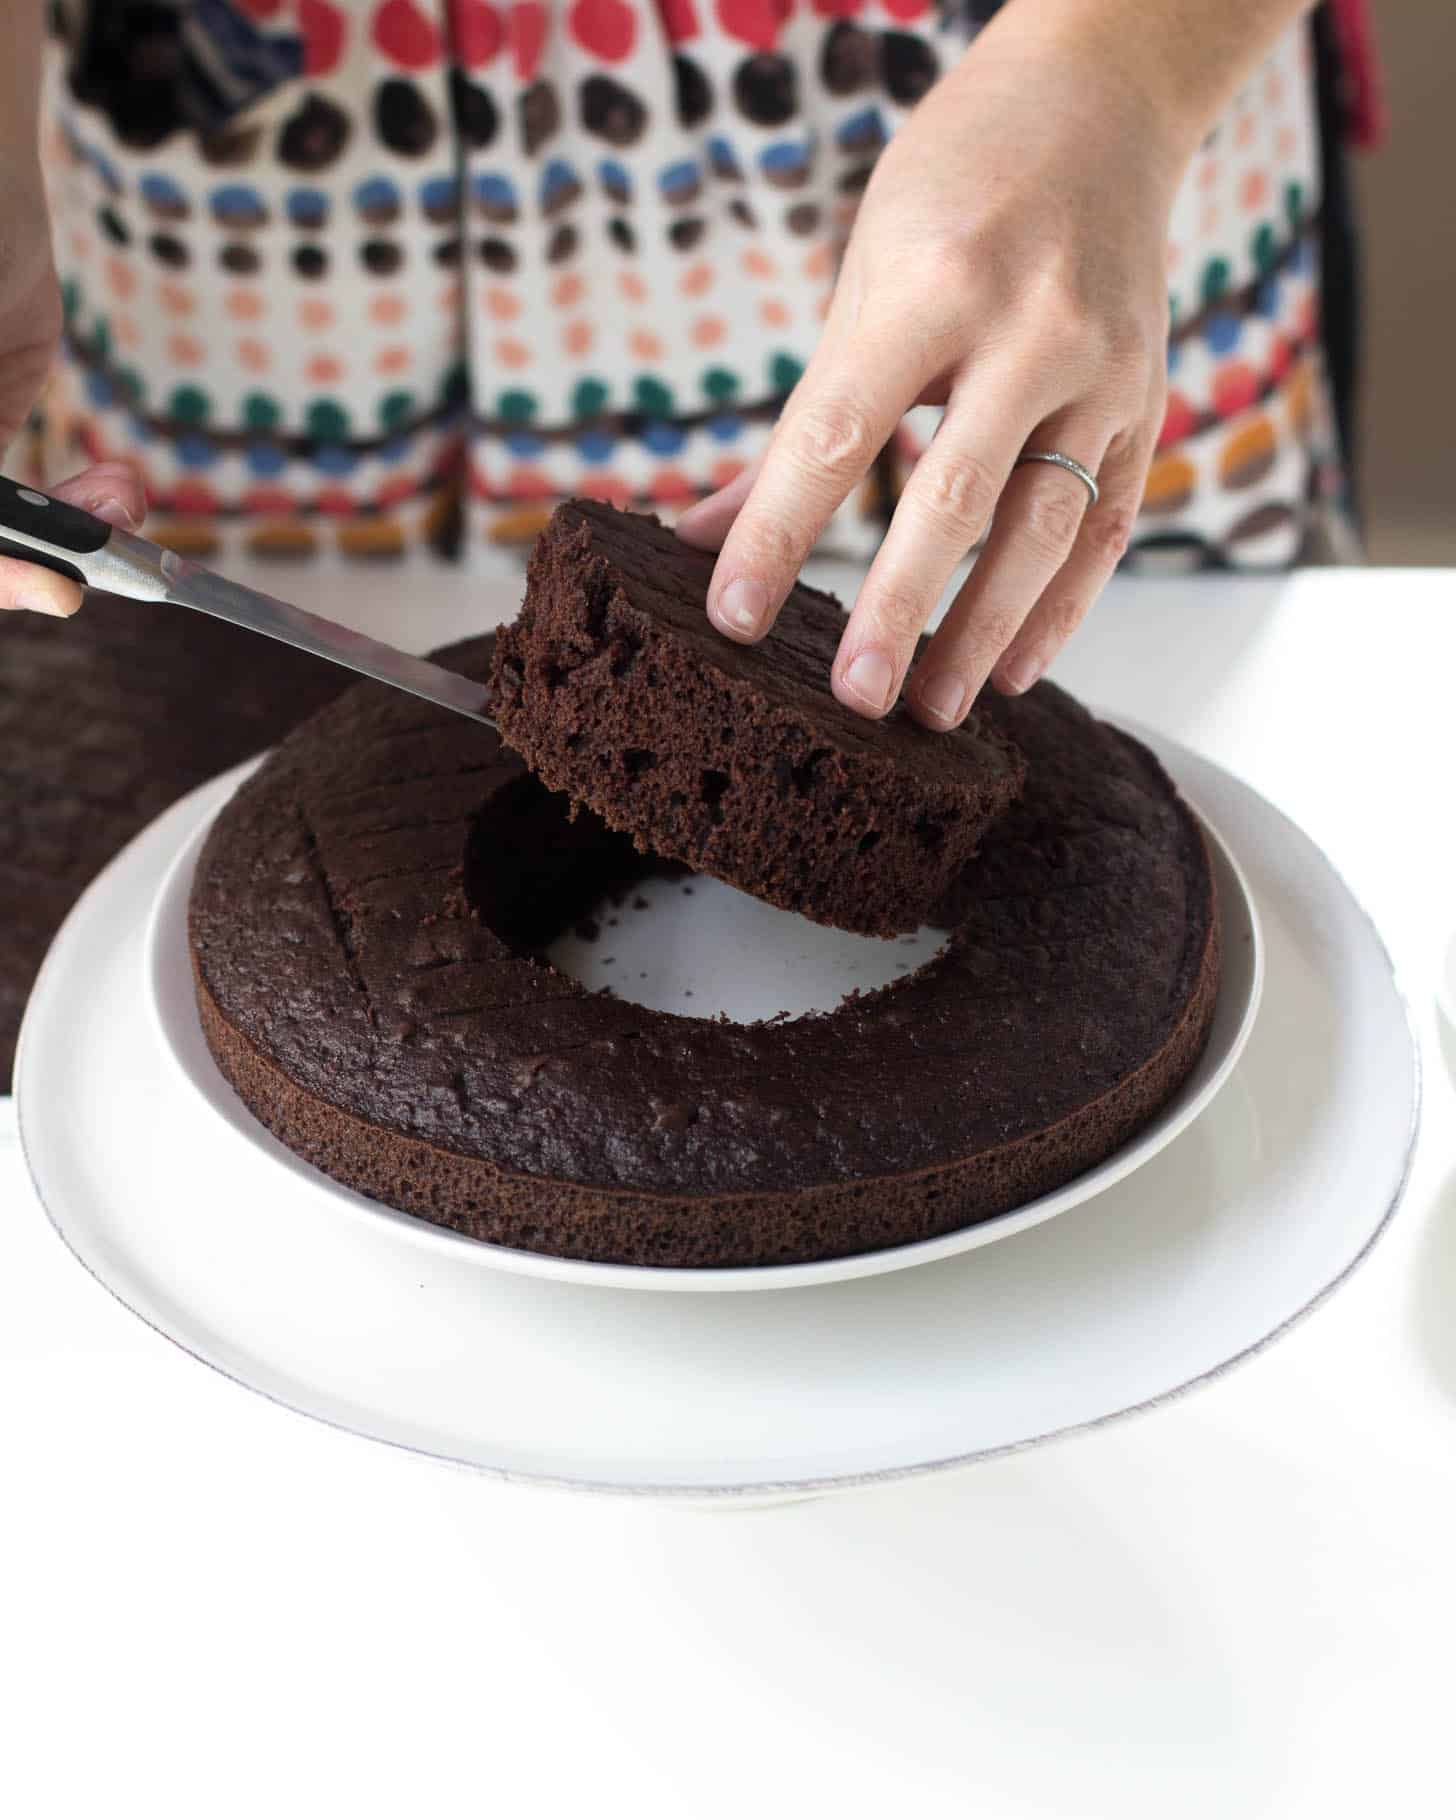 removing the center from a chocolate cake